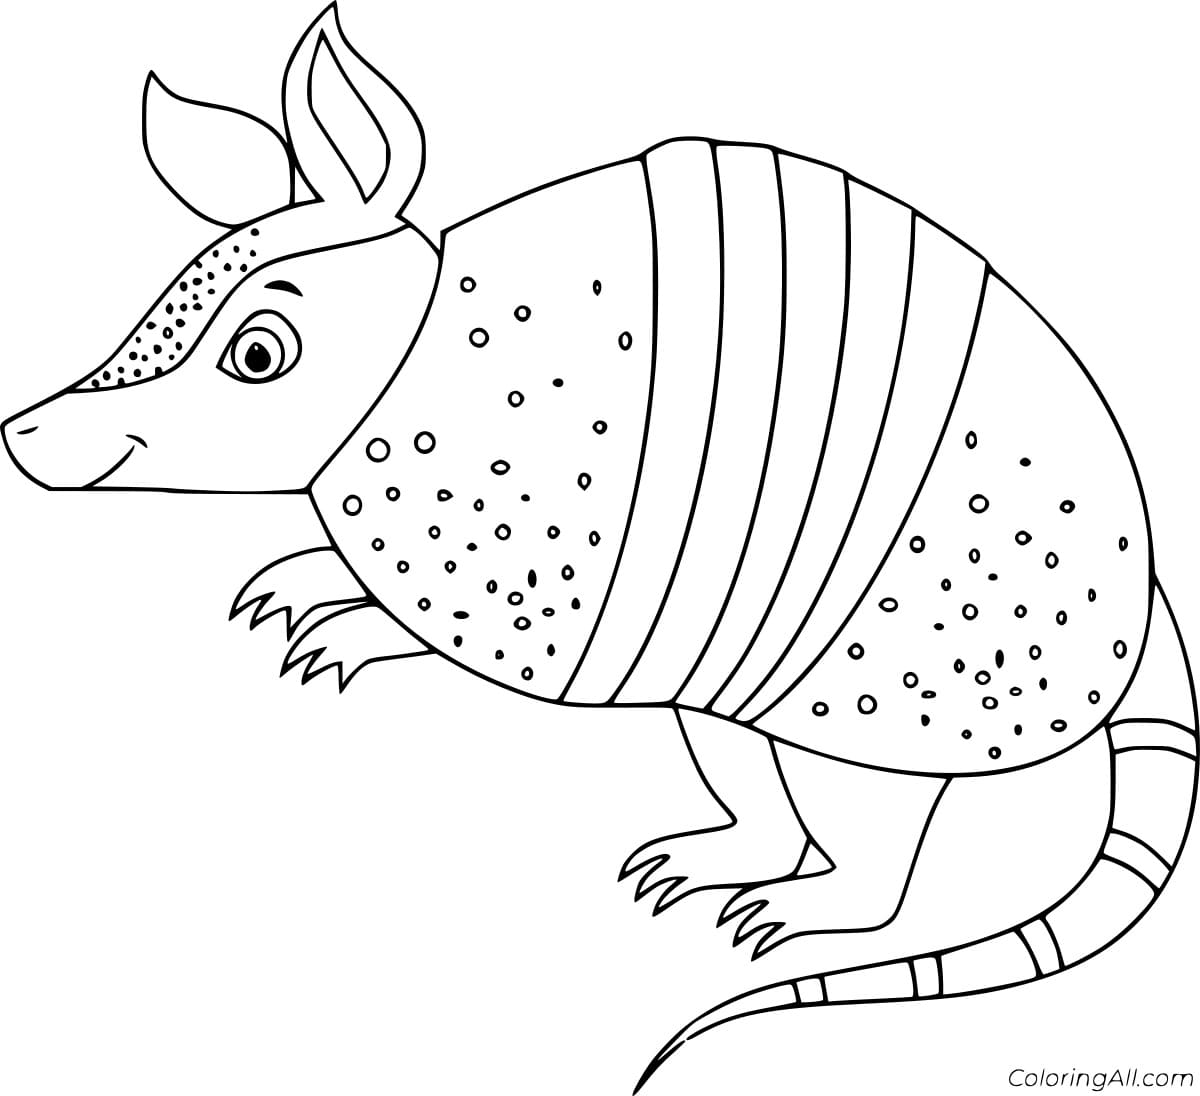 Cute Cartoon Armadillo Picture Coloring Page